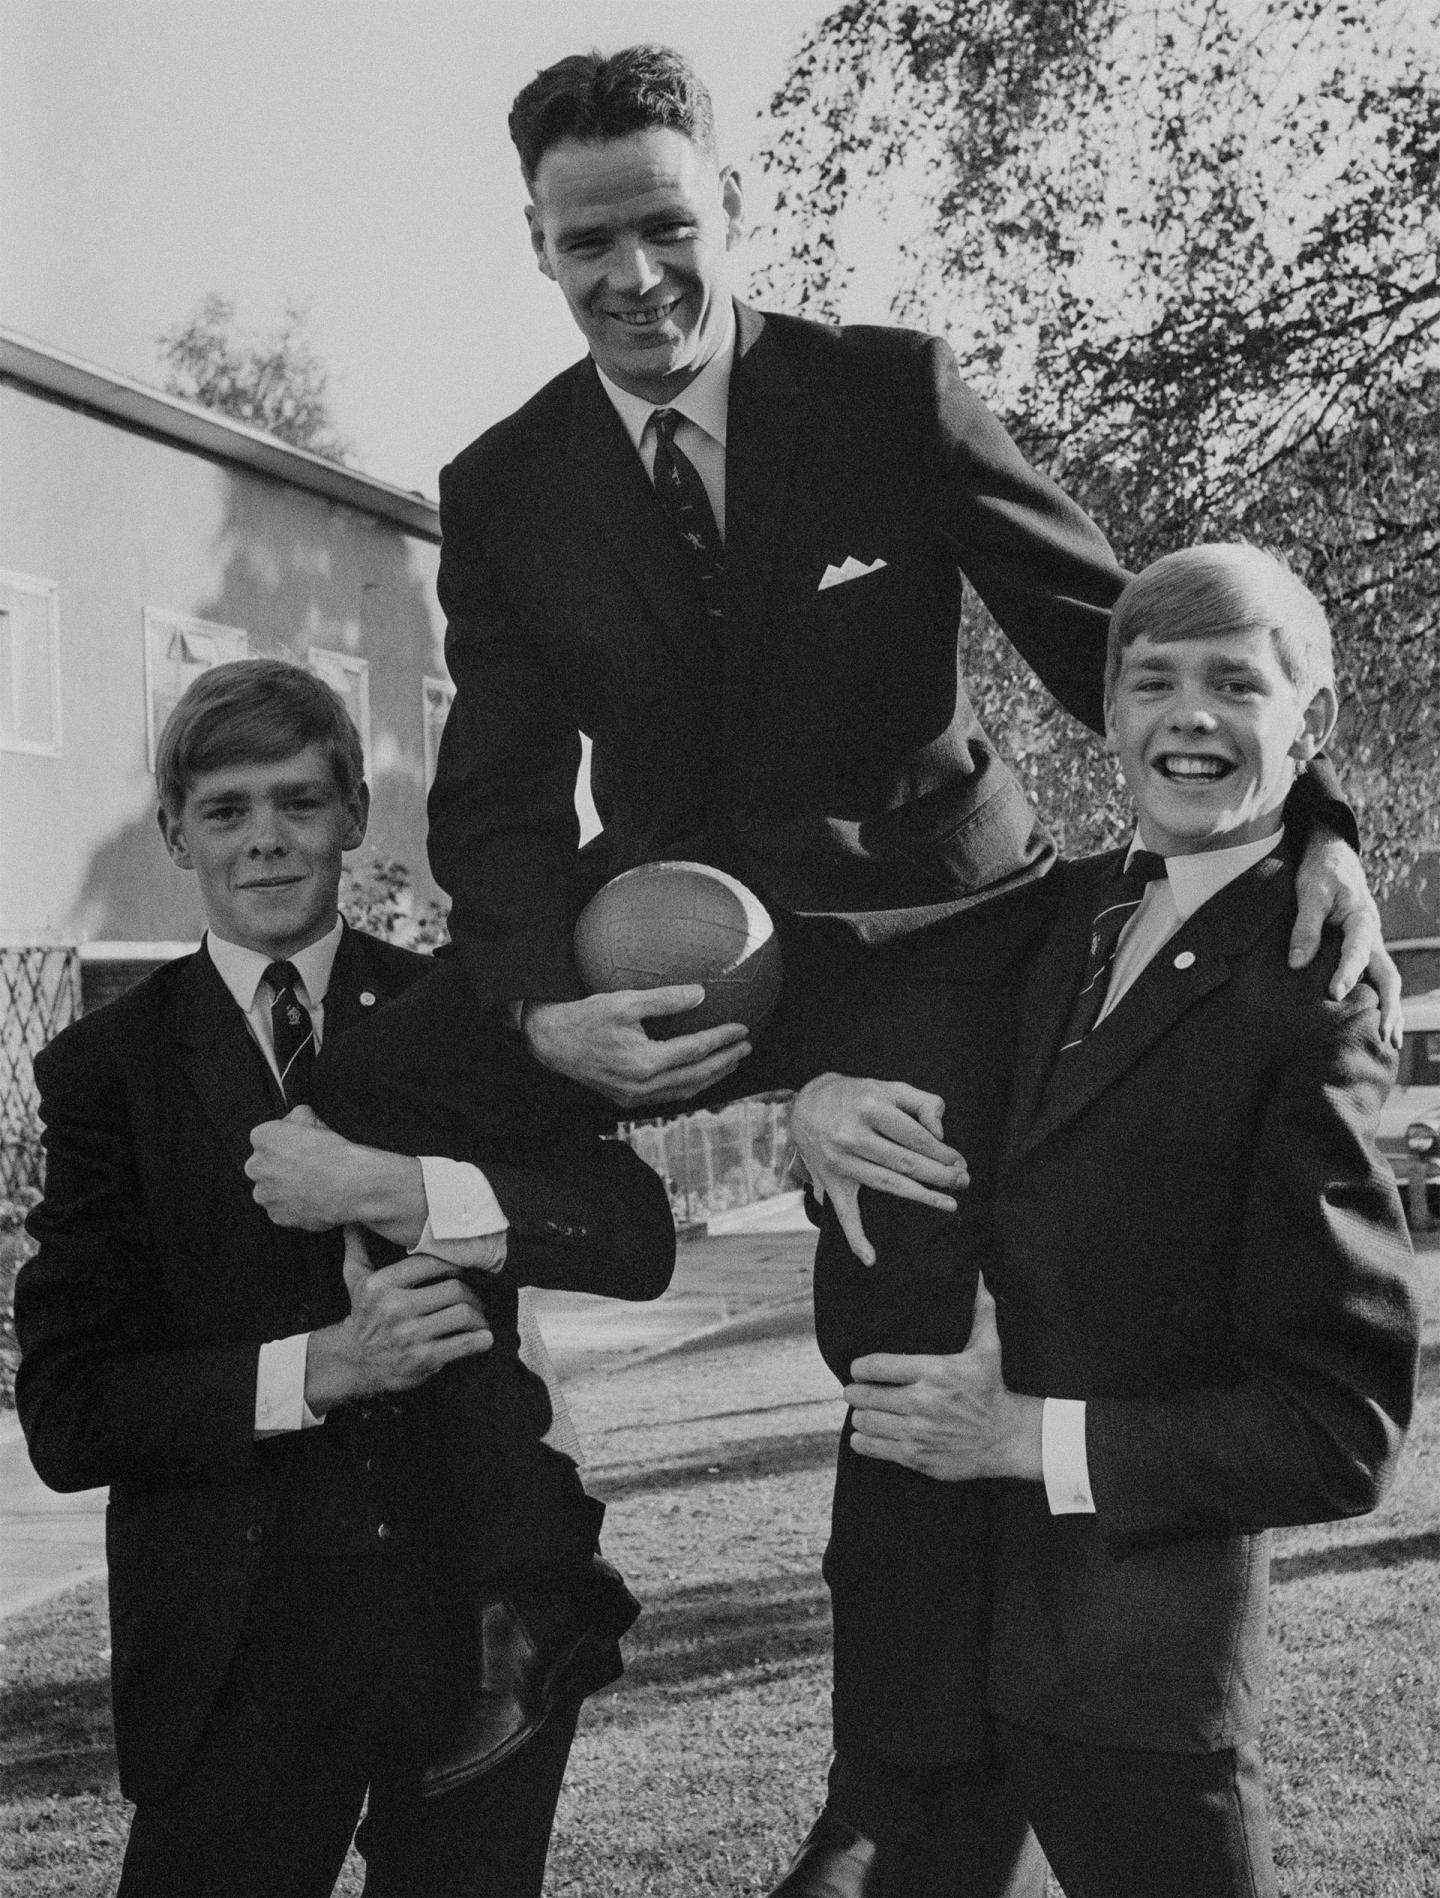 Billy with his twin sons, David and Malcolm